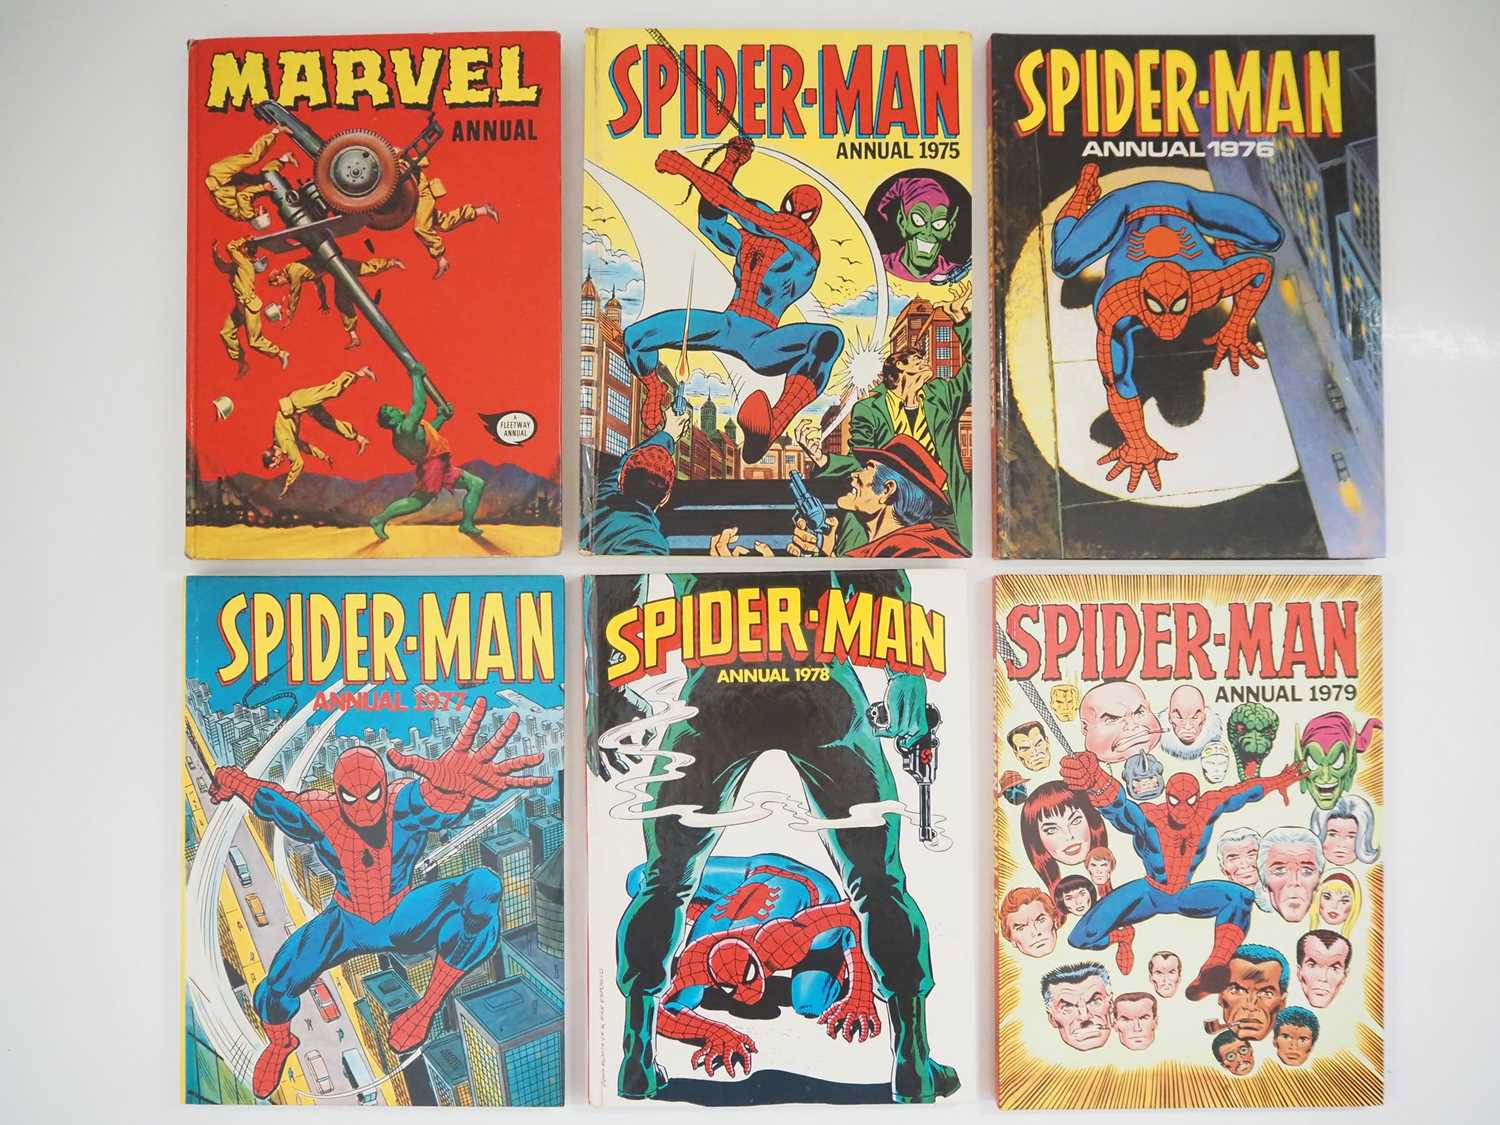 MARVEL ANNUAL LOT (6 in Lot) - Includes MARVEL ANNUAL (1972 - IPC) + SPIDER-MAN ANNUAL 1975, 1976,